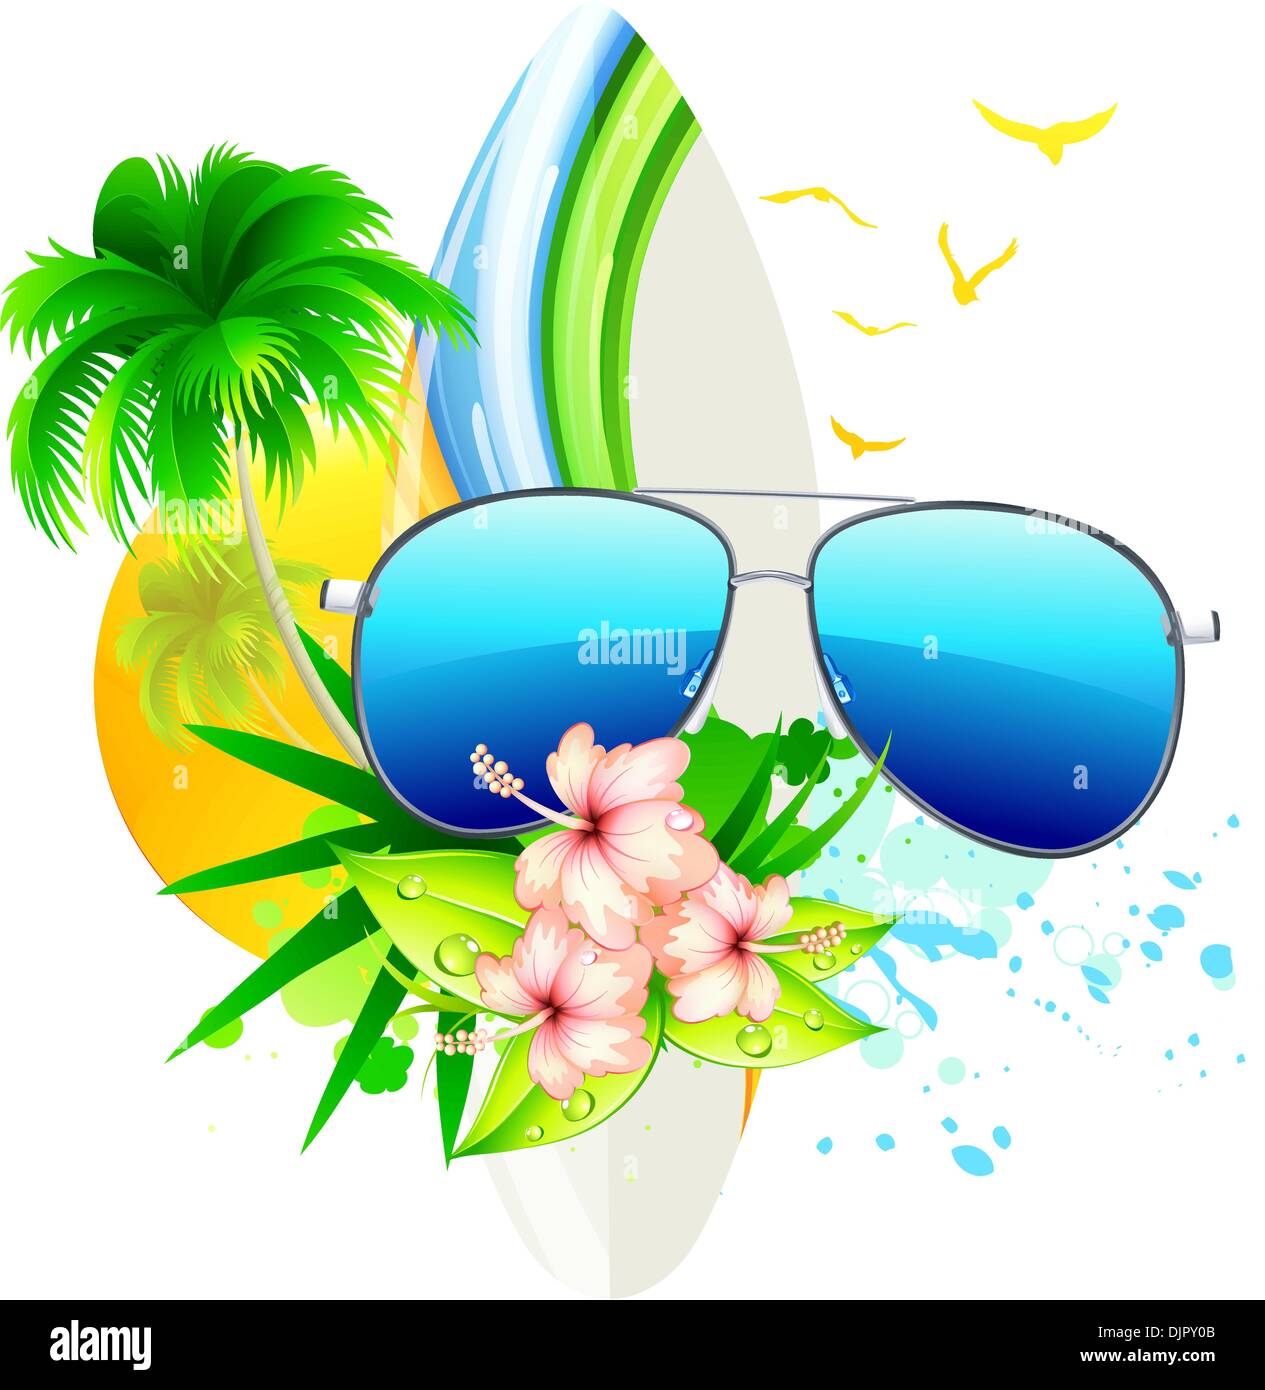 Vector illustration of funky summer  background with palm trees, hibiscus flowers, surfboard and funky sunglasses Stock Vector